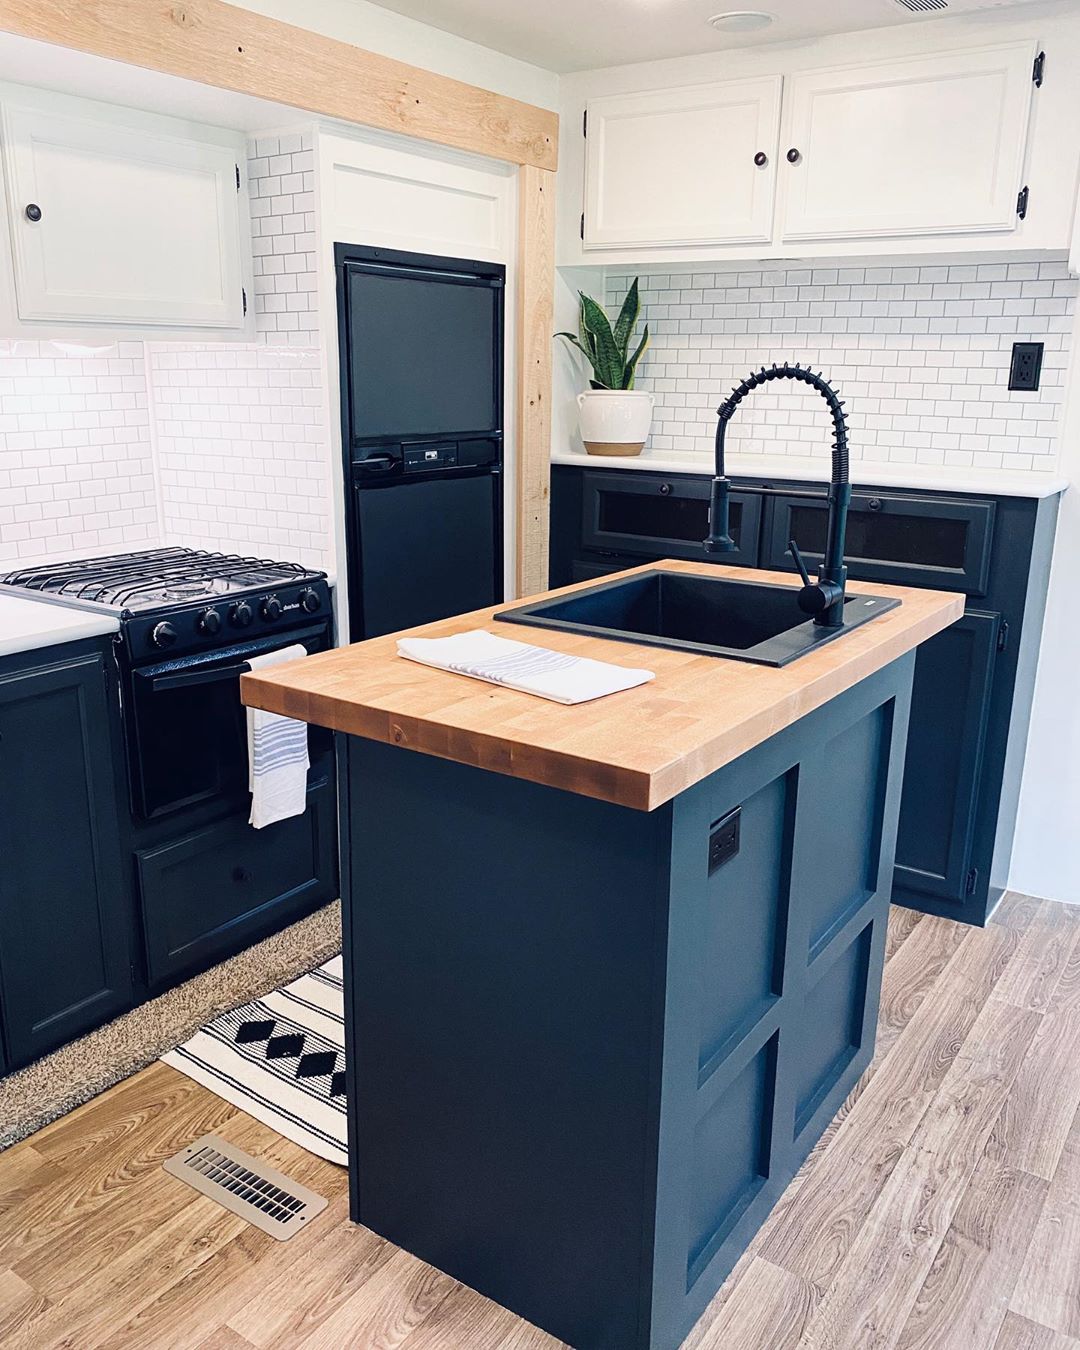 new RV kitchen island with farmhouse faucet and butcher block counter photo by Instagram user @tiny.living.erin